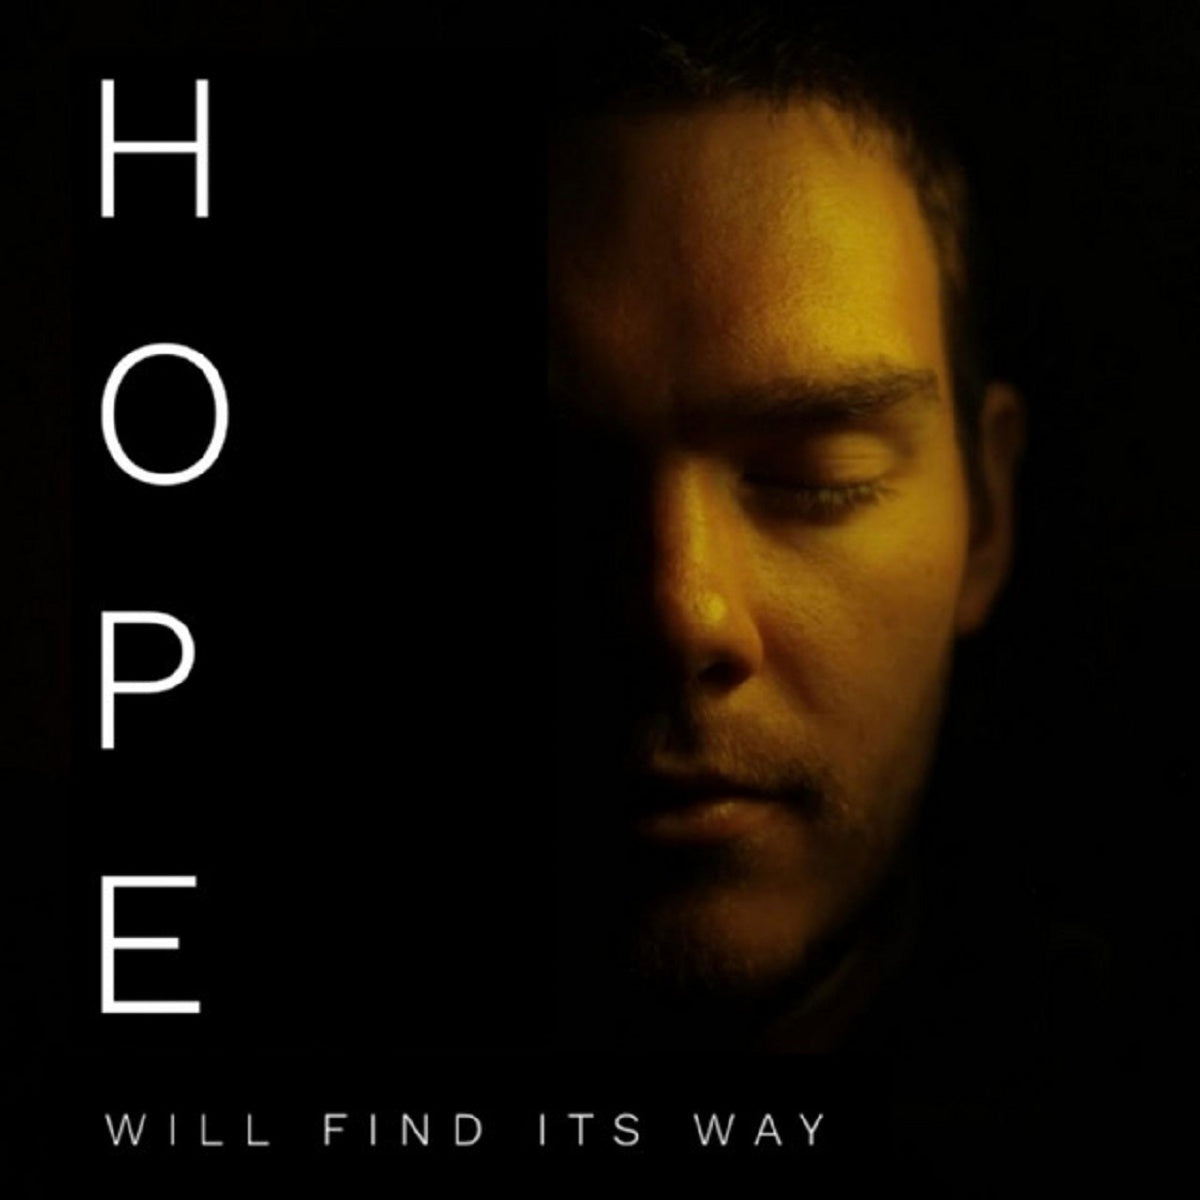 Andrew Patterson - ‘Hope Will Find Its Way’